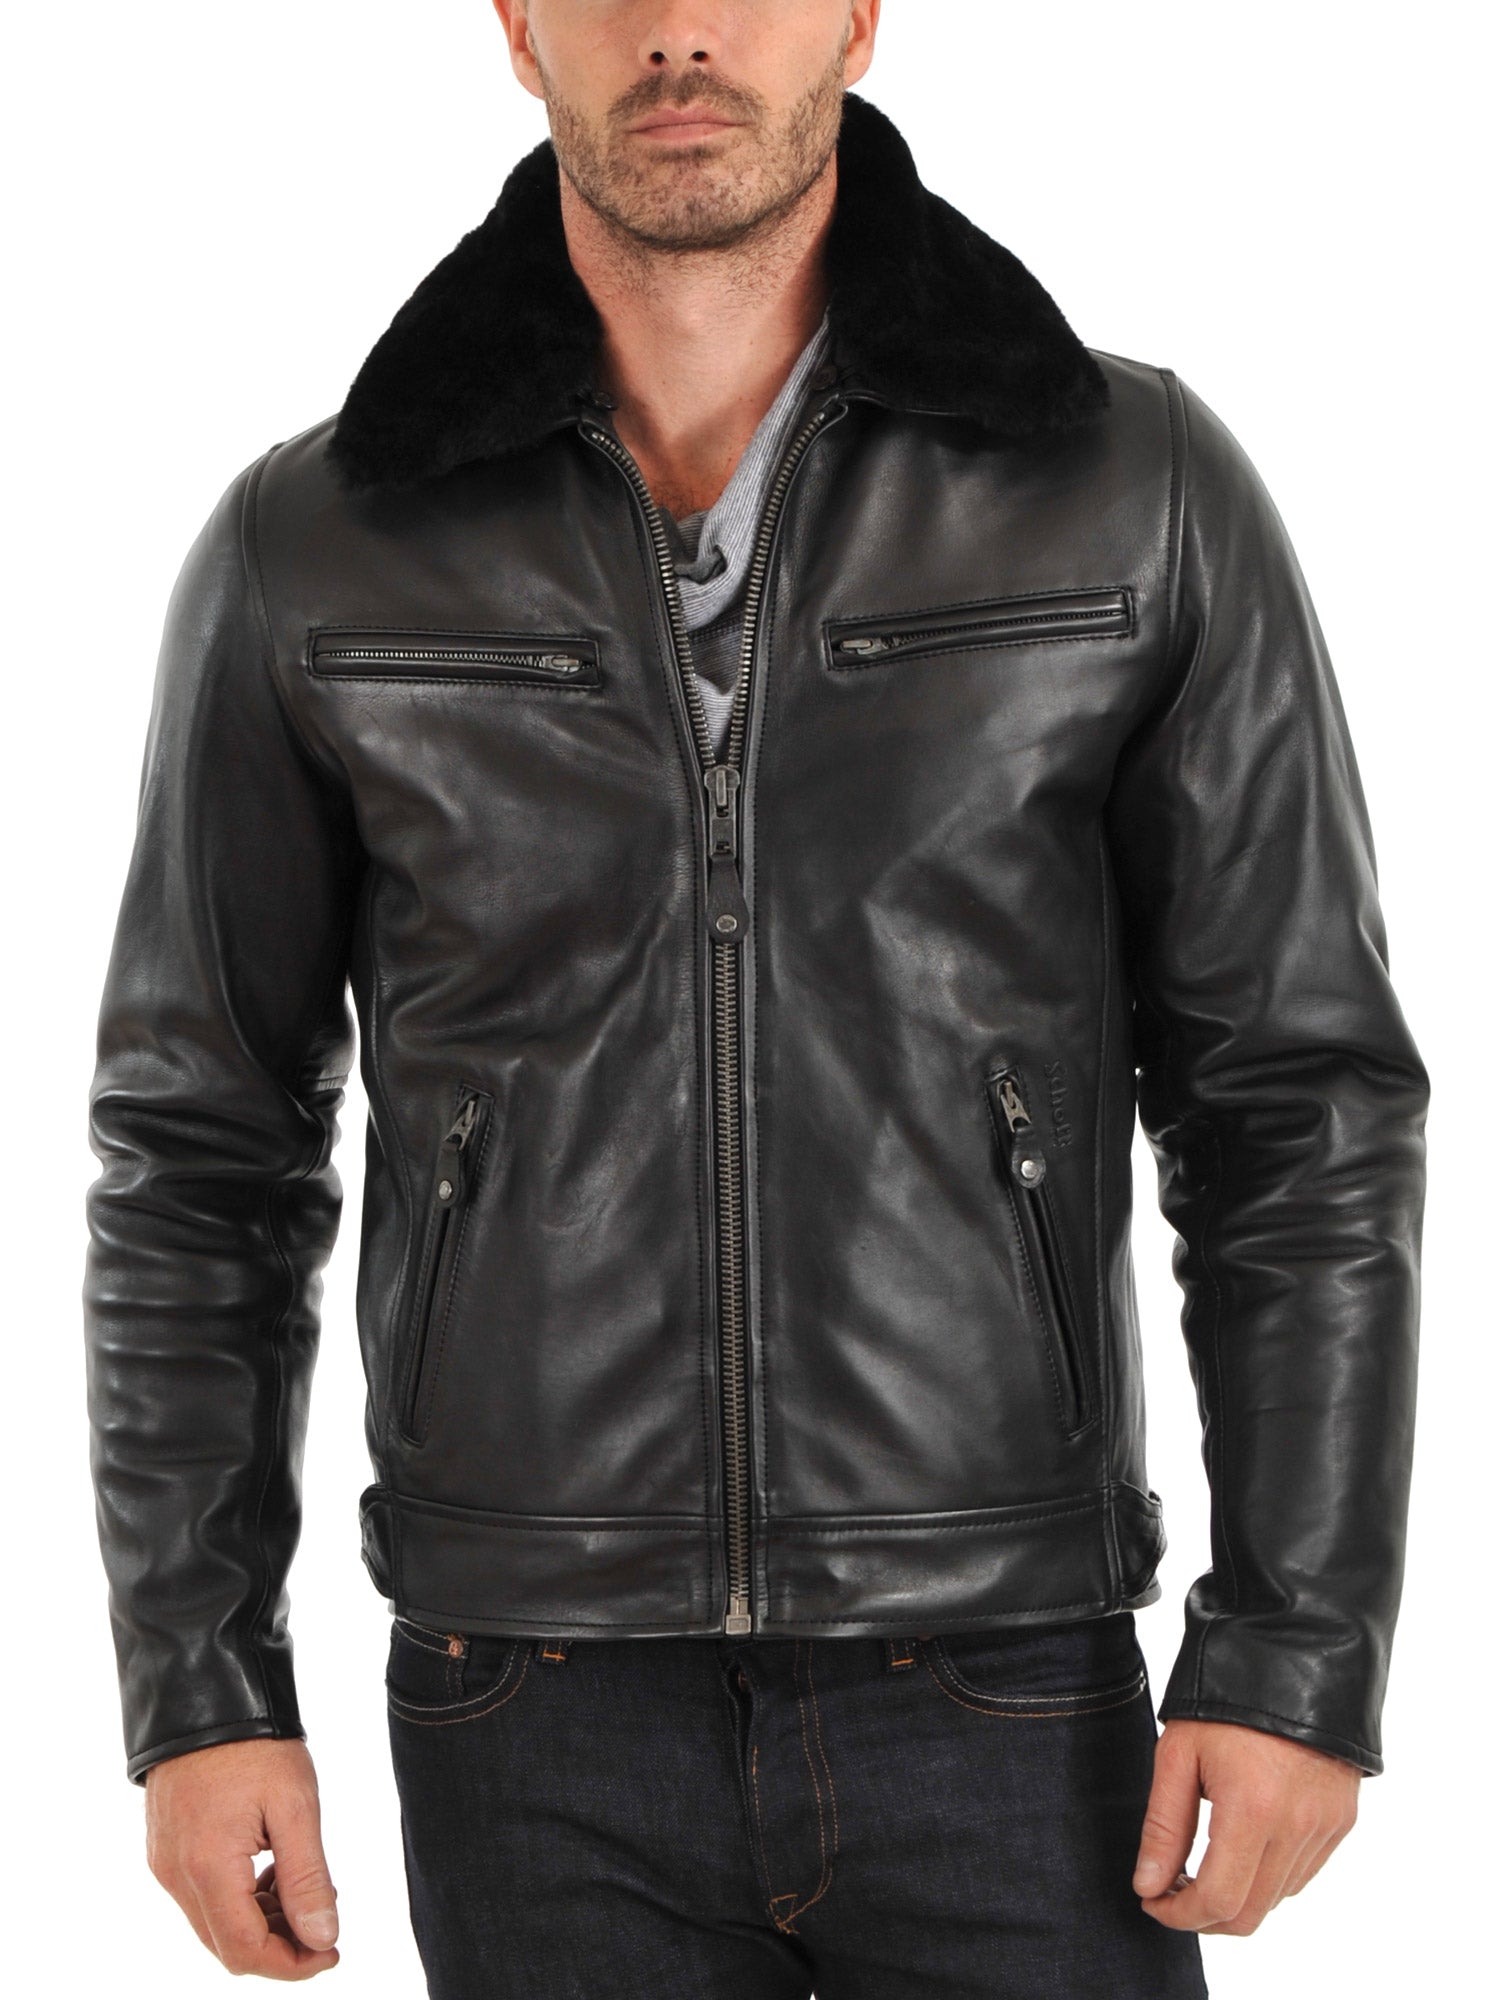 men’s black leather jacket with zippers and fur collar